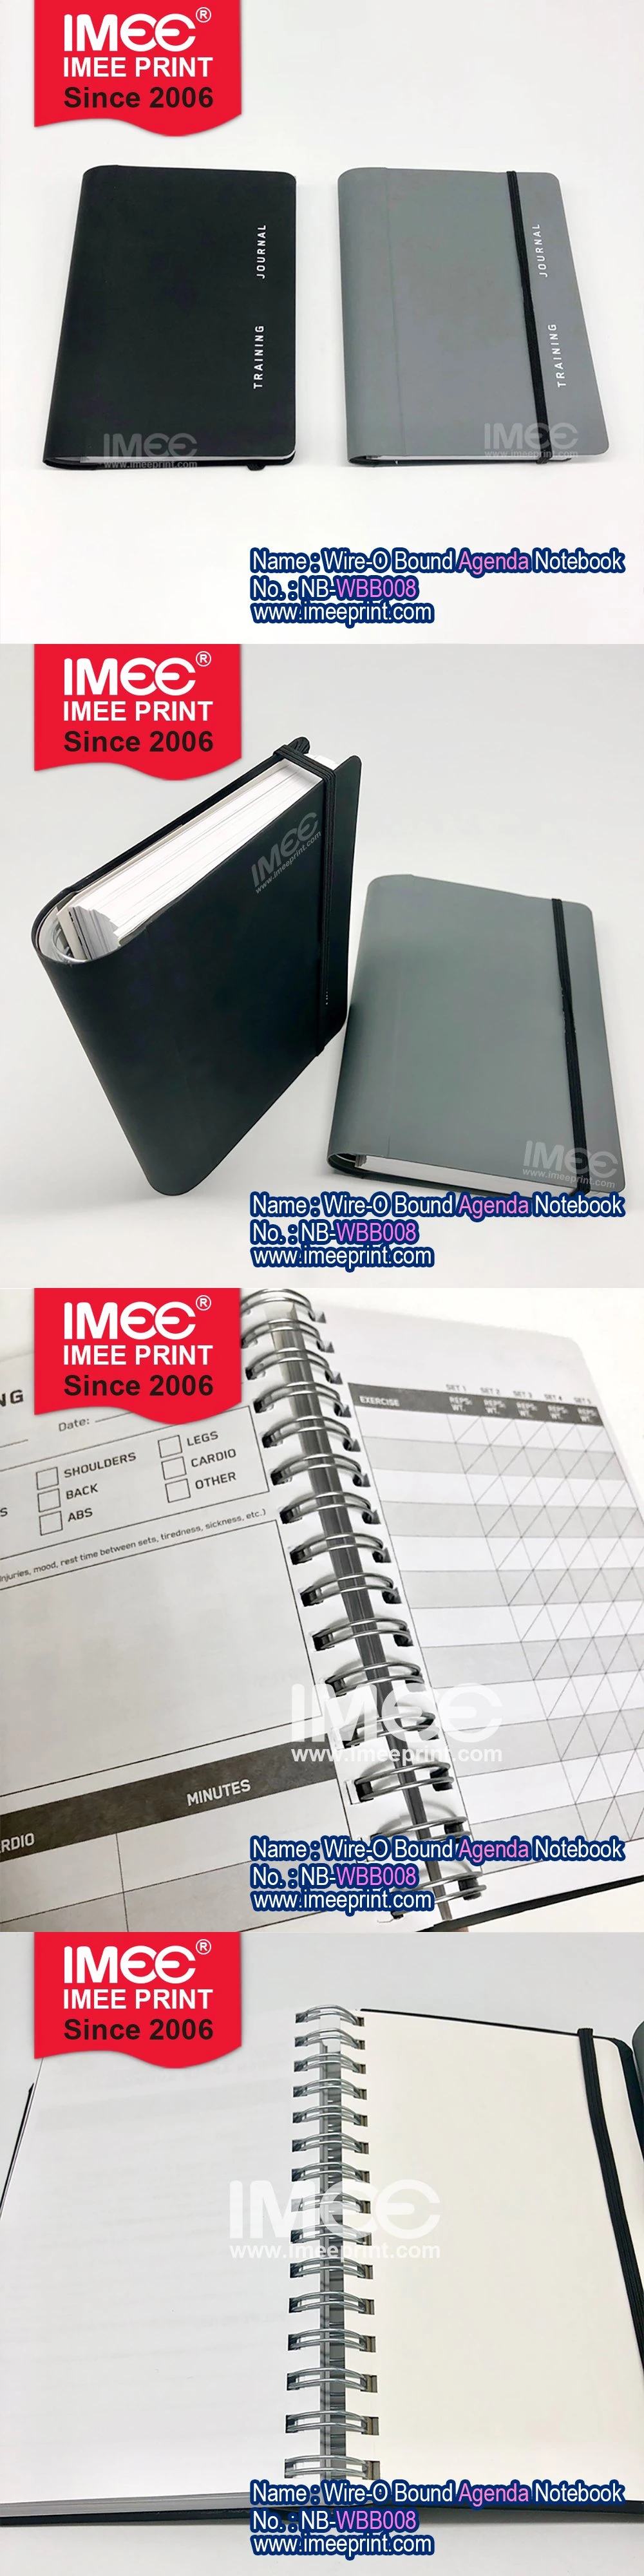 Imee Printing Wholesale Customized spiral Wire-O Ring Binder Journal Agenda Planner Notebook